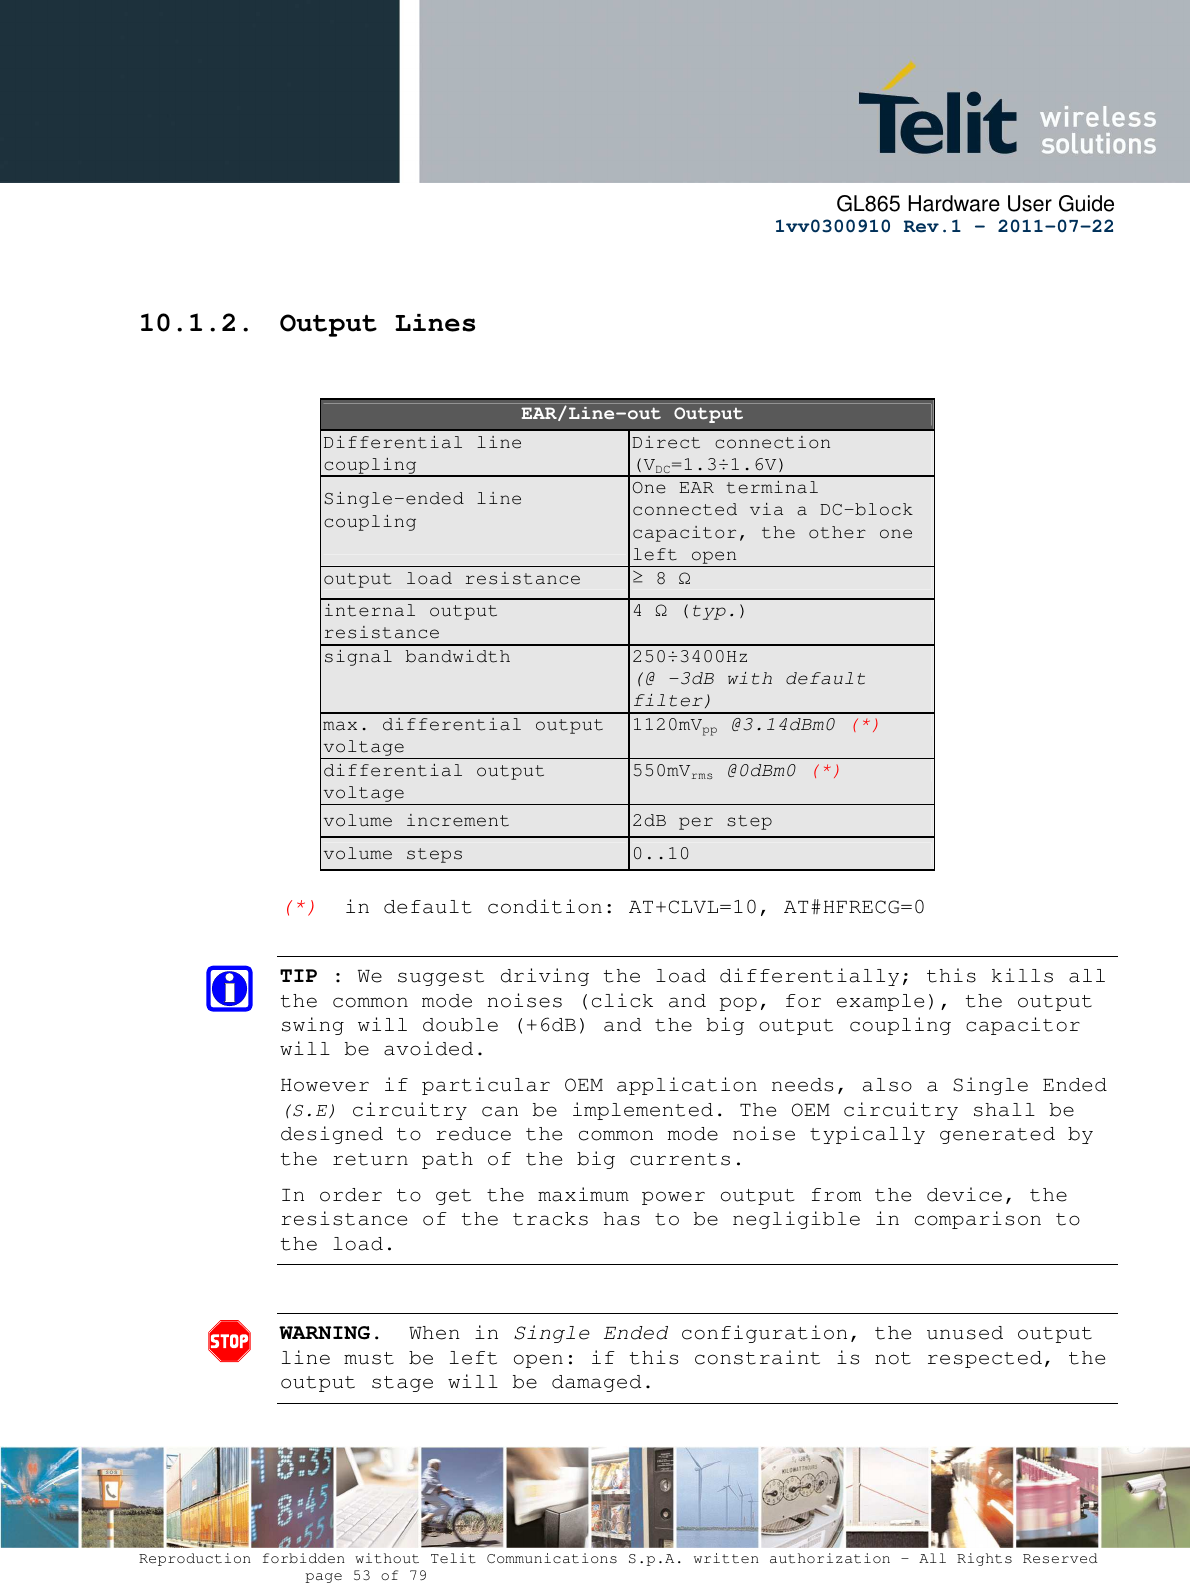      GL865 Hardware User Guide     1vv0300910 Rev.1 – 2011-07-22       Reproduction forbidden without Telit Communications S.p.A. written authorization - All Rights Reserved    page 53 of 79       10.1.2. Output Lines     EAR/Line-out Output Differential line coupling Direct connection (VDC=1.3÷1.6V) Single-ended line coupling    One EAR terminal connected via a DC-block capacitor, the other one left open output load resistance  ≥ 8 Ω internal output resistance 4 Ω (typ.) signal bandwidth  250÷3400Hz (@ -3dB with default filter) max. differential output voltage 1120mVpp @3.14dBm0 (*) differential output voltage 550mVrms @0dBm0 (*) volume increment  2dB per step volume steps  0..10  (*)  in default condition: AT+CLVL=10, AT#HFRECG=0  TIP : We suggest driving the load differentially; this kills all the common mode noises (click and pop, for example), the output swing will double (+6dB) and the big output coupling capacitor will be avoided. However if particular OEM application needs, also a Single Ended (S.E) circuitry can be implemented. The OEM circuitry shall be designed to reduce the common mode noise typically generated by the return path of the big currents. In order to get the maximum power output from the device, the resistance of the tracks has to be negligible in comparison to the load.  WARNING.  When in Single Ended configuration, the unused output line must be left open: if this constraint is not respected, the output stage will be damaged.  